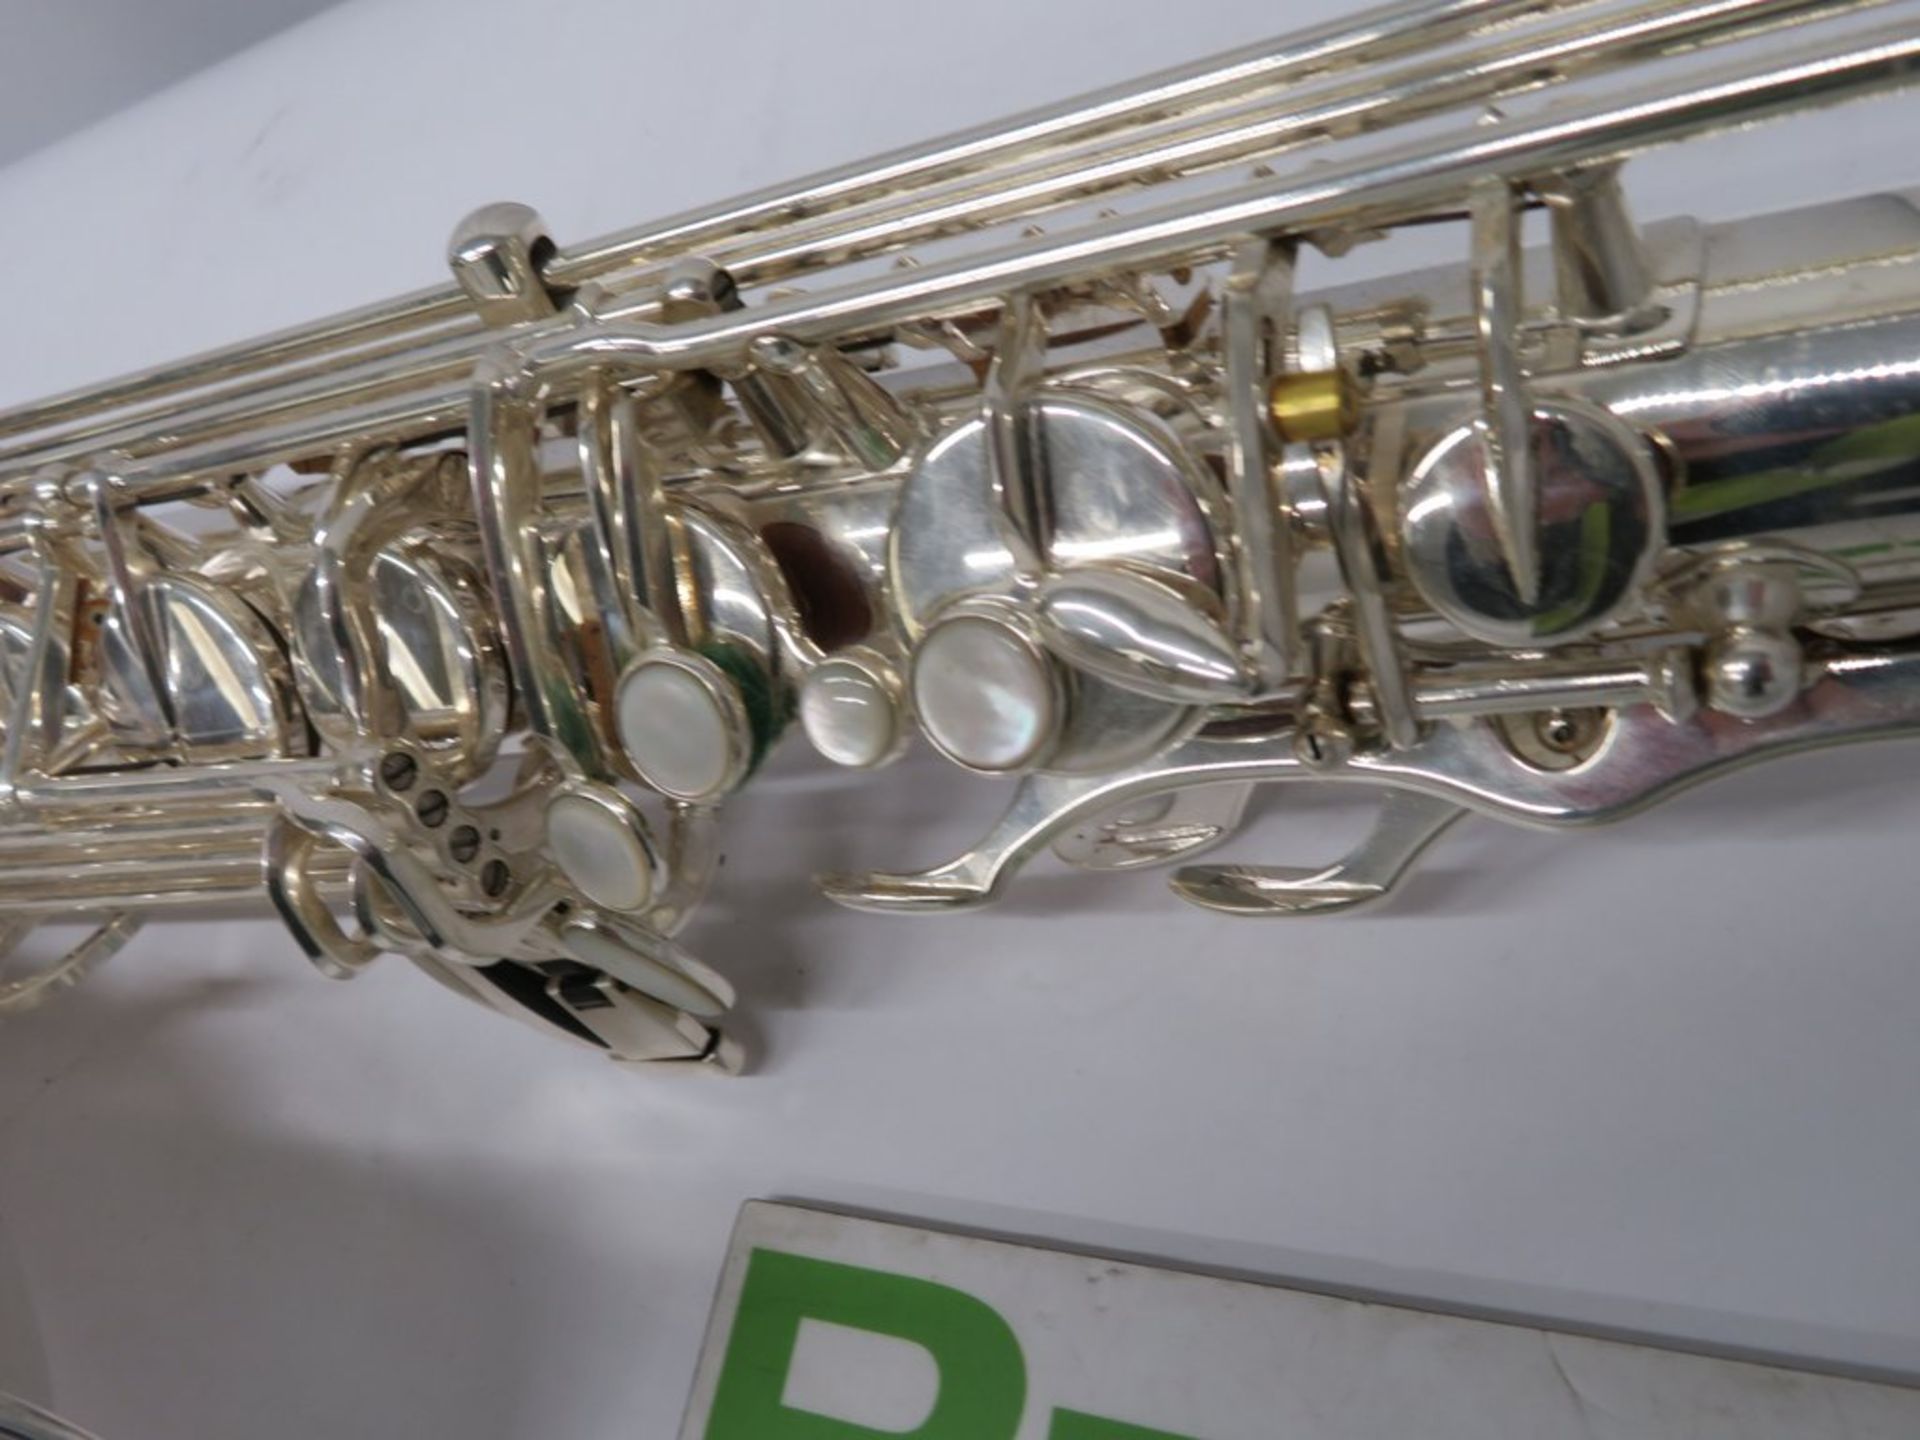 Henri Selmer Super Action 80 Serie 2 Tenor Saxophone With Case. Serial Number: N.607728. - Image 10 of 20